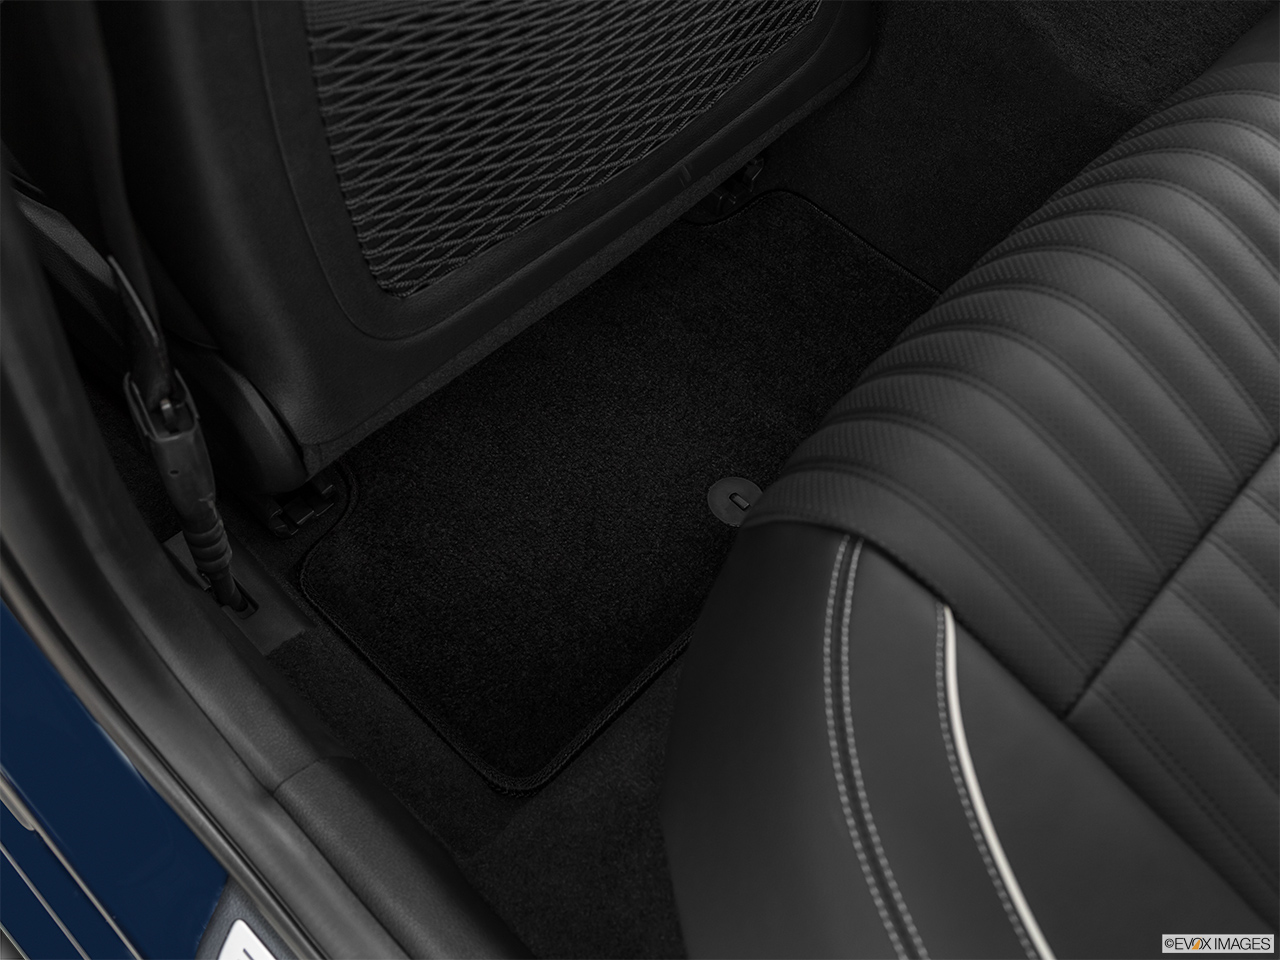 2020 Genesis G70 3.3T Elite Rear driver's side floor mat. Mid-seat level from outside looking in. 